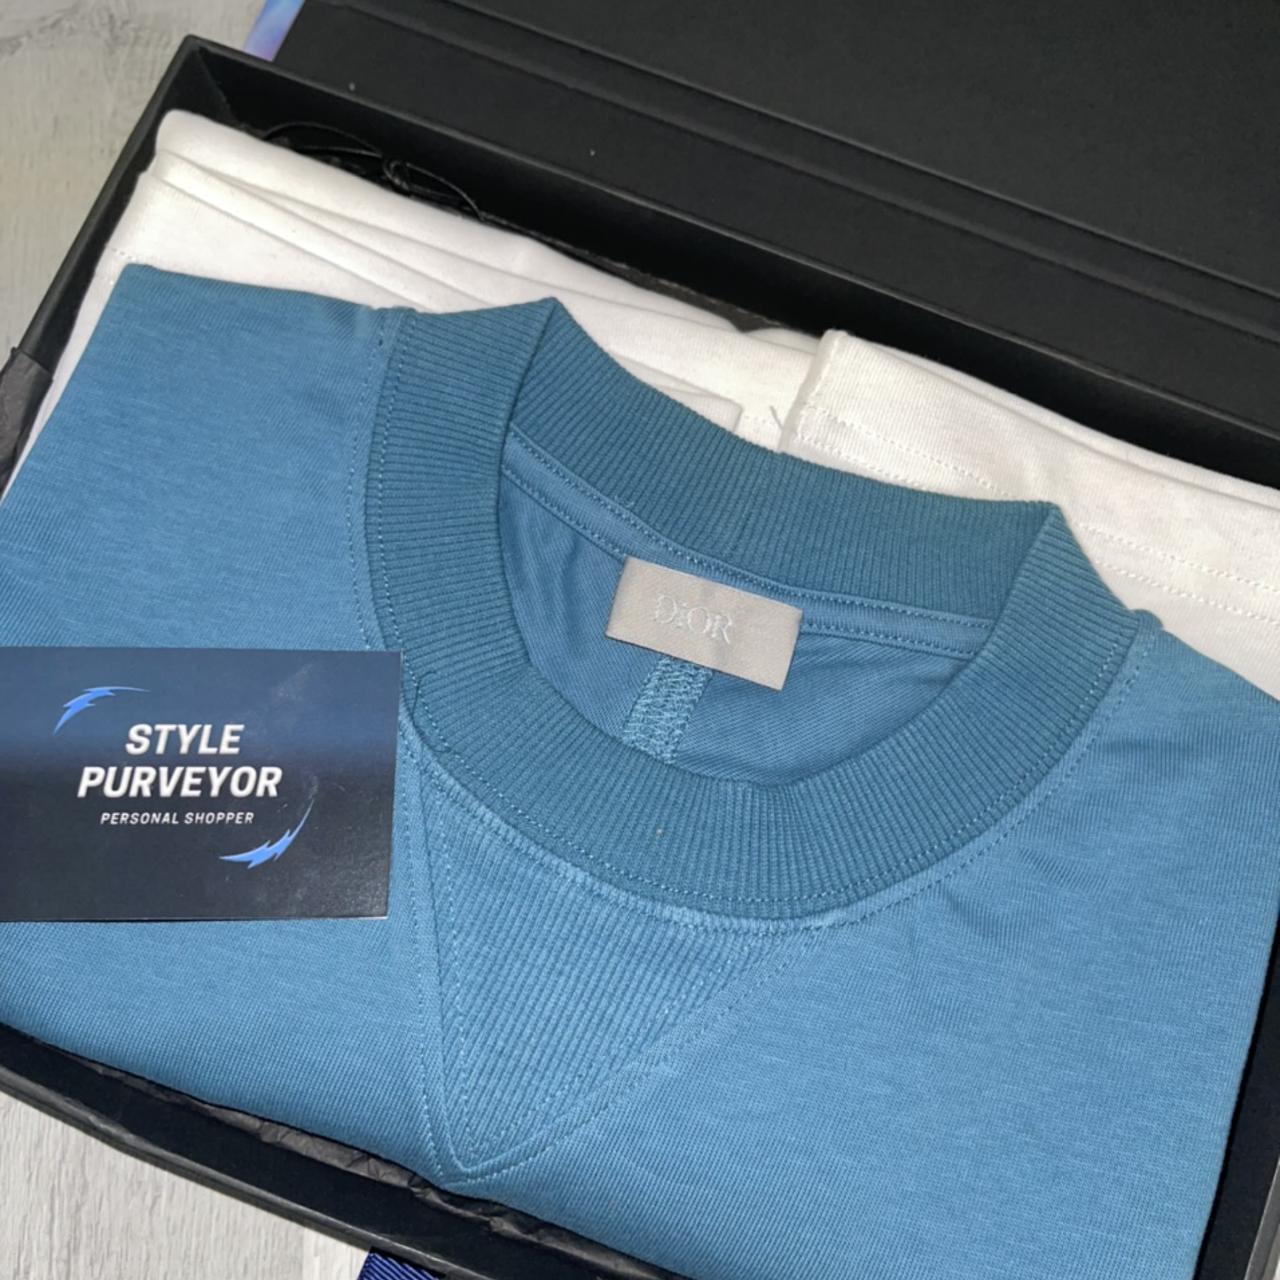 MENS DIOR T-SHIRT FRESH IN BOX AND PACKAGING - Depop